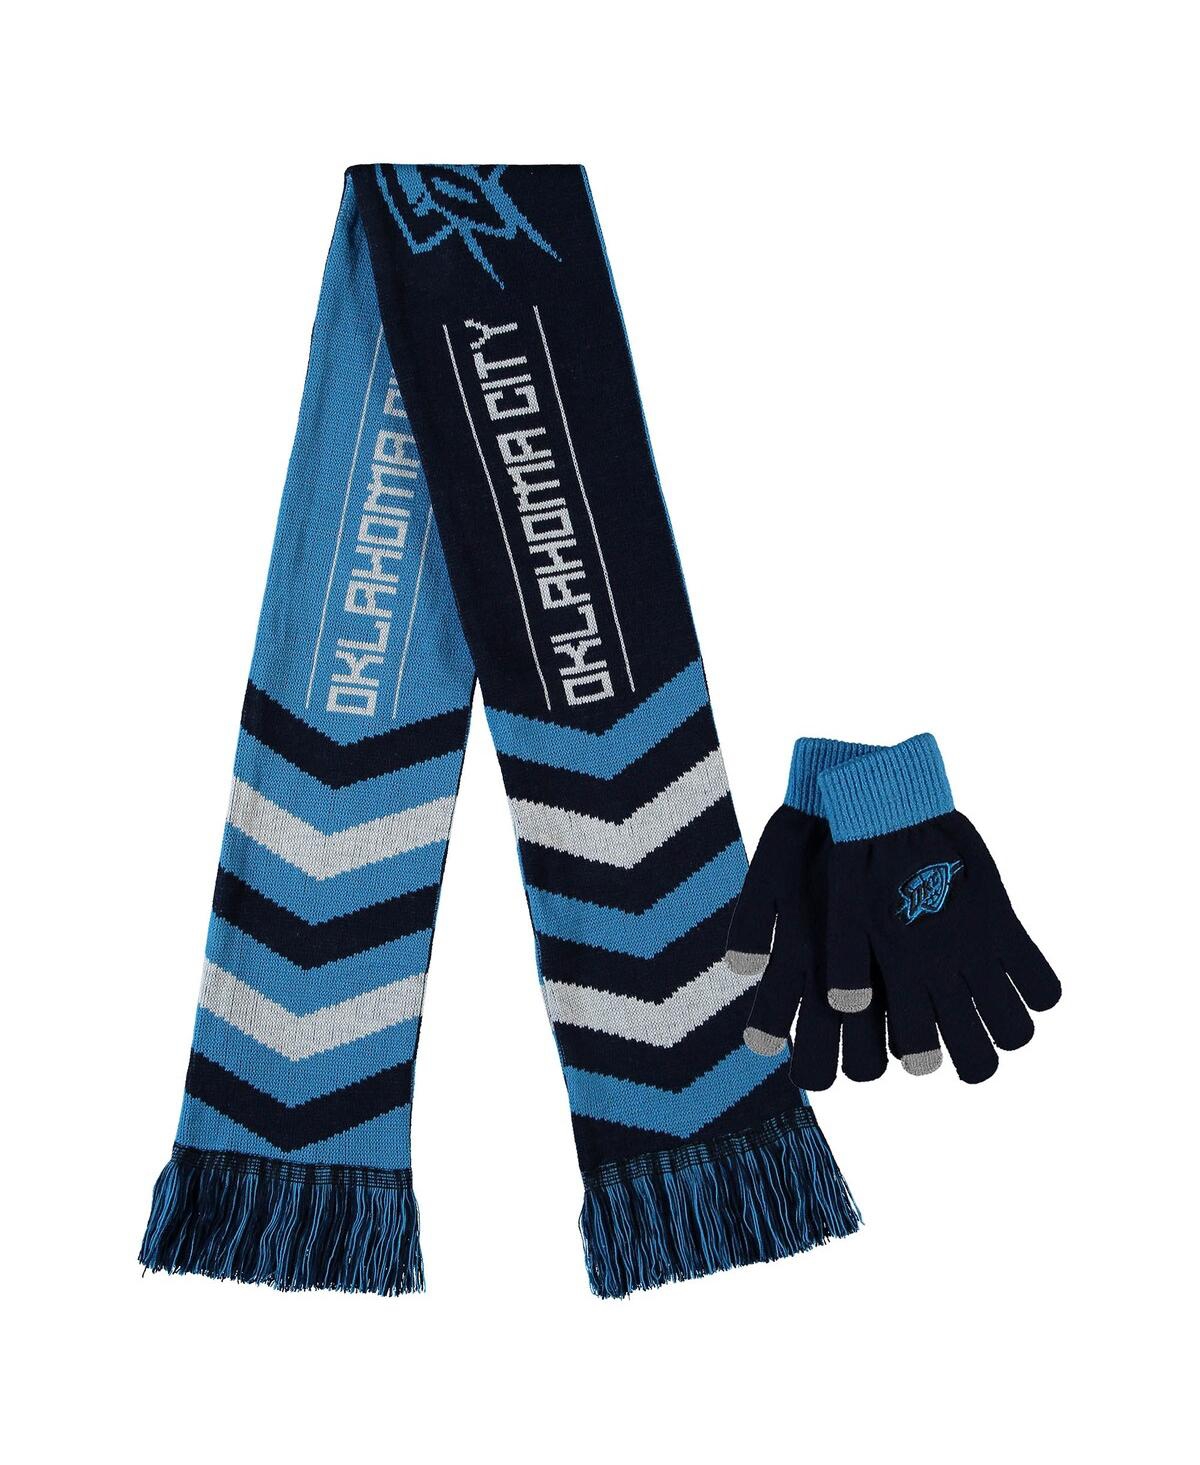 Men's and Women's Foco Blue Oklahoma City Thunder Glove and Scarf Combo Set - Blue